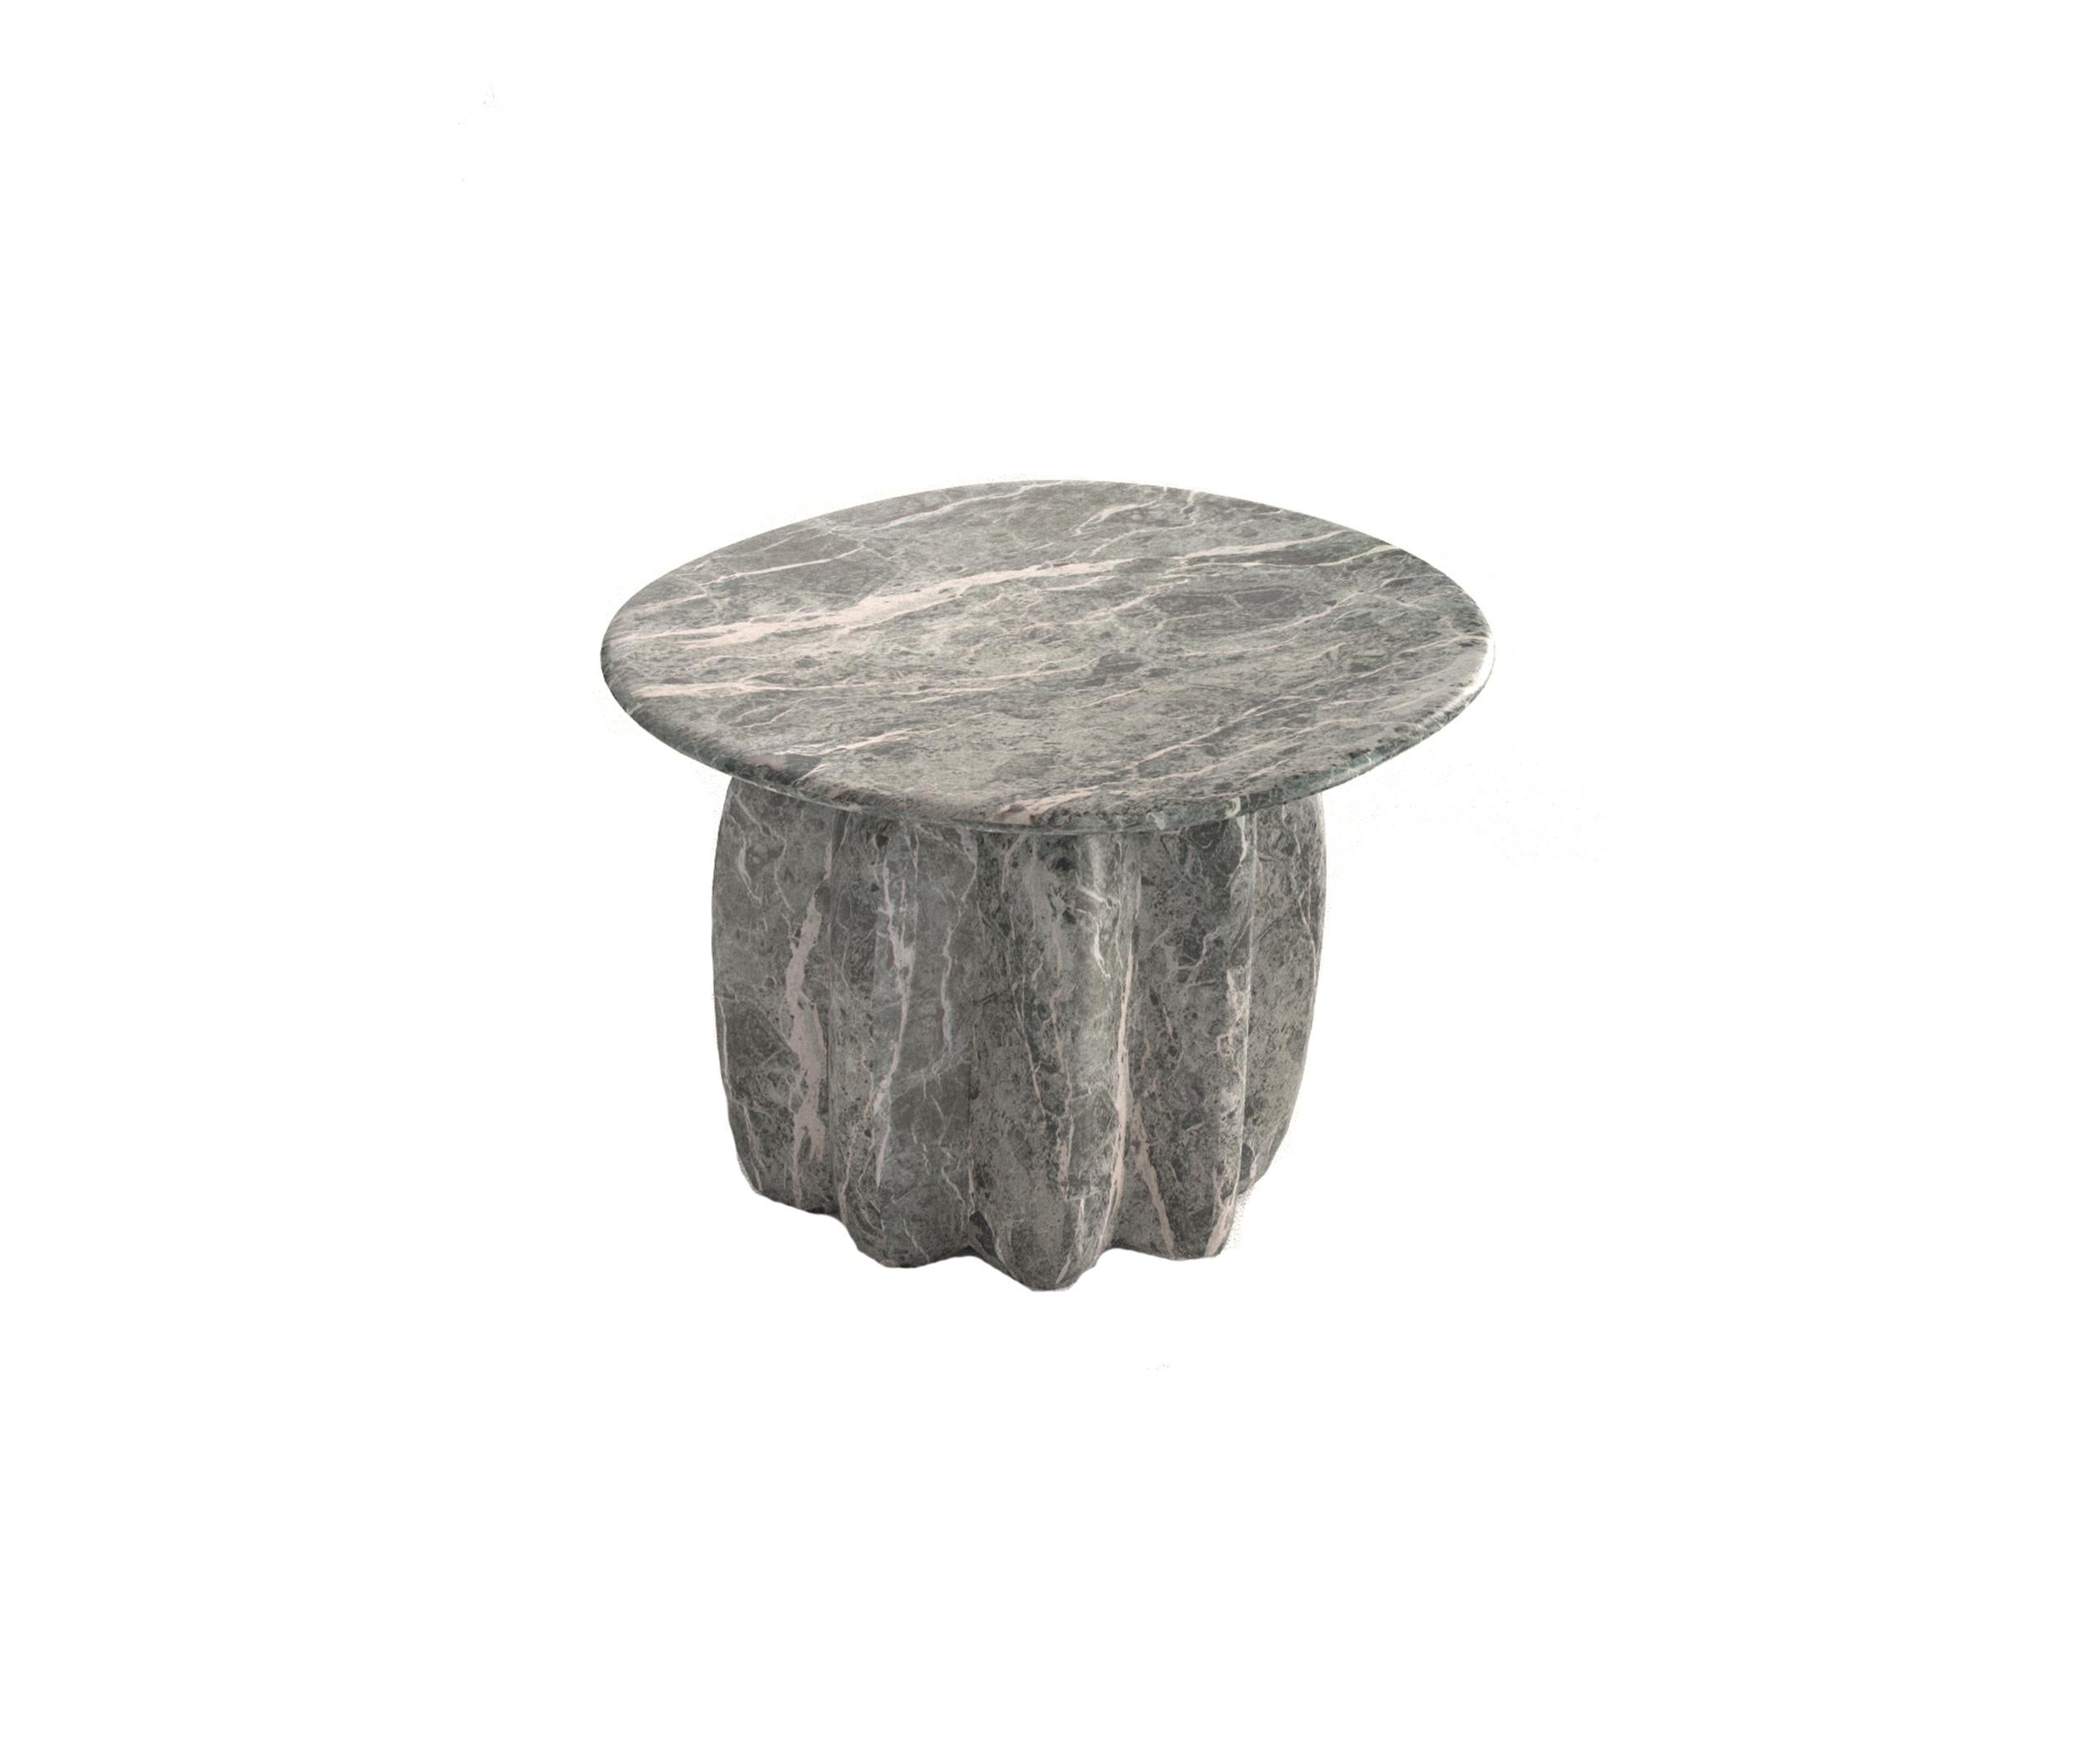 Low Bolero Marble Accent Table by Alter Ego Studio
Dimensions: D 57 x W 57 x H 40 cm. 
Materials: Grey Collemandina marble.
Available in other marbles.

The products are made from natural stone, so the pattern will be unique for each product.
Matte